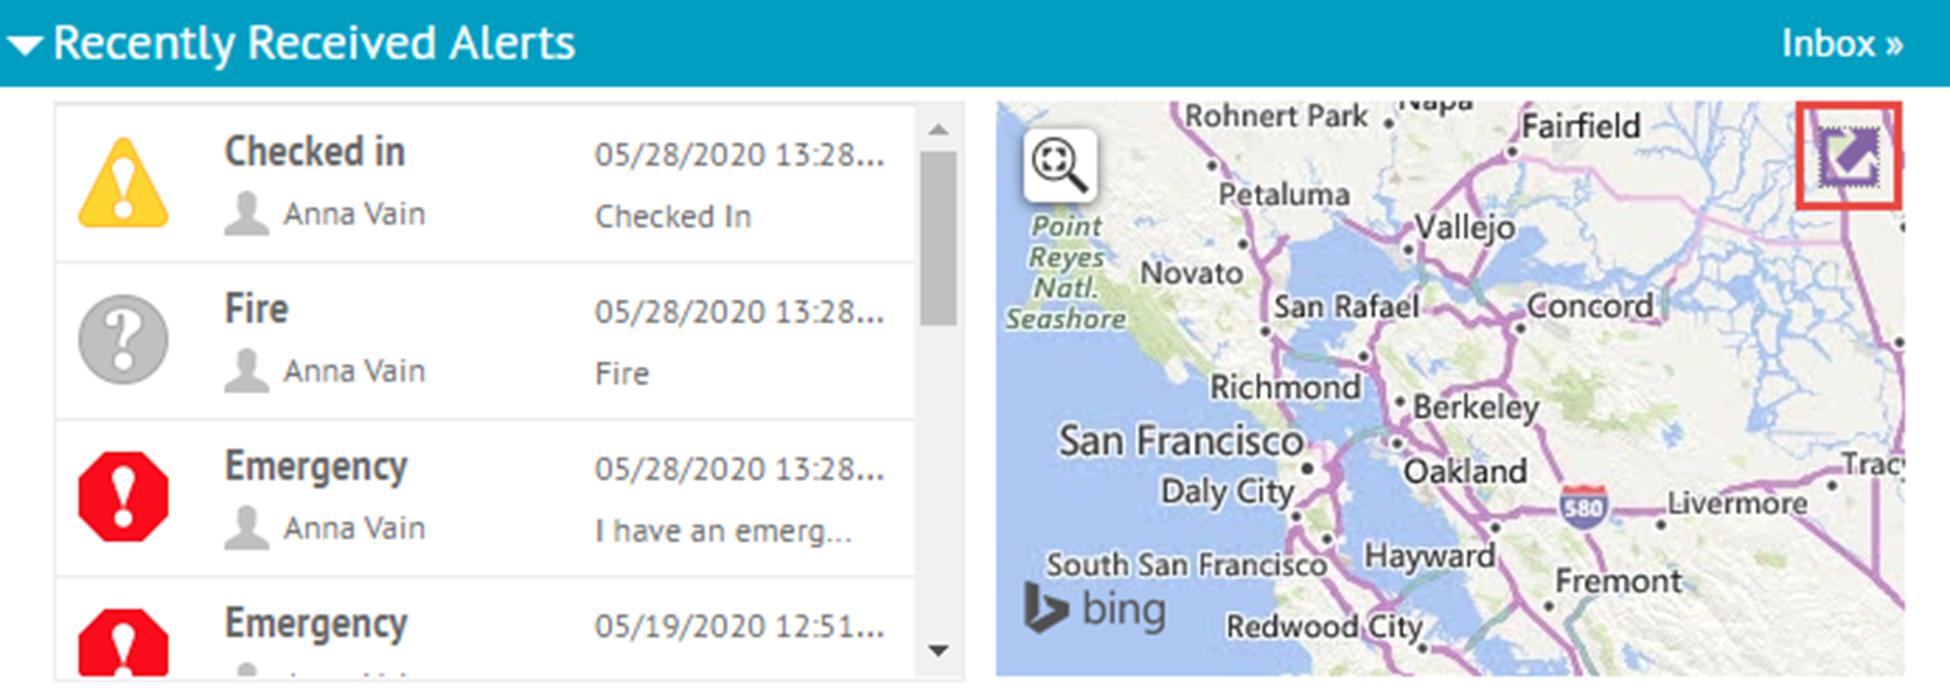 View the live map from the Recently Received Alerts section